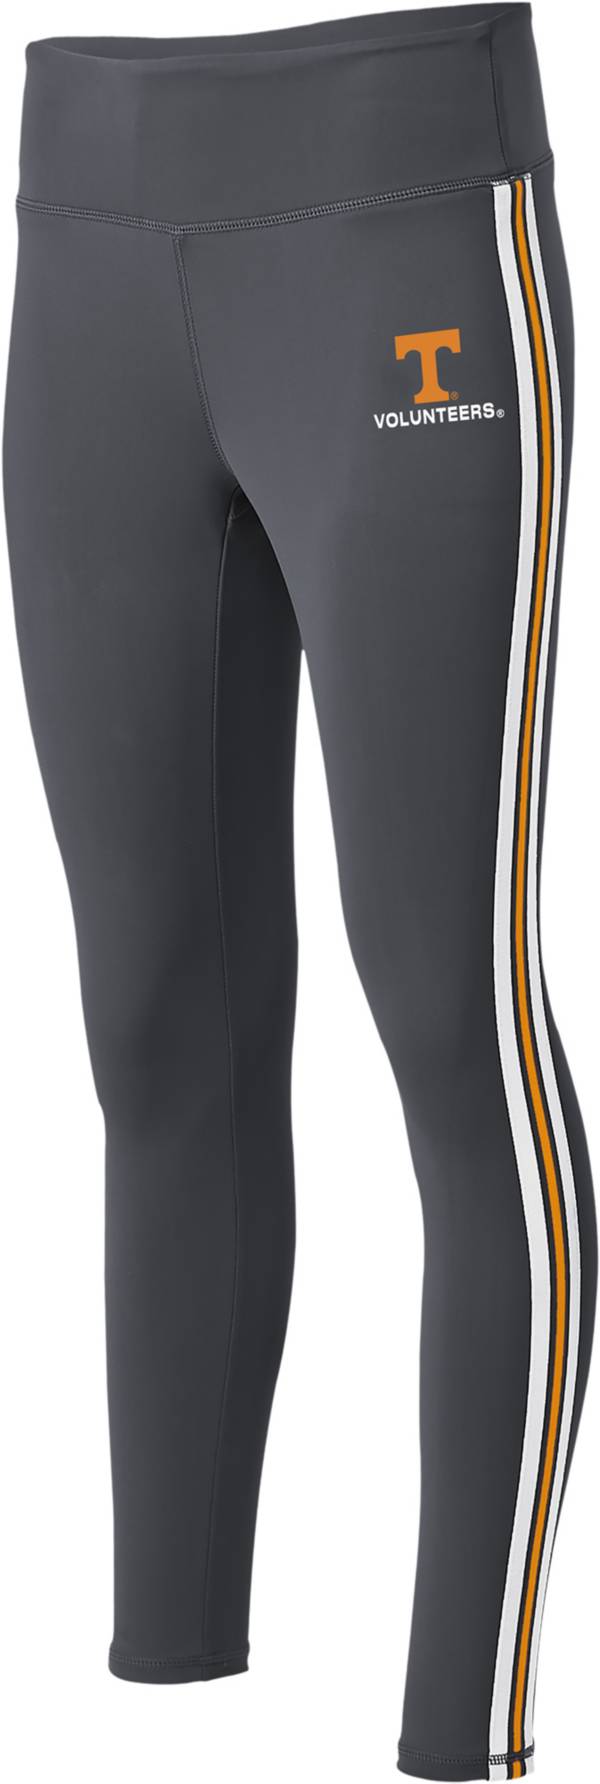 WEAR by Erin Andrews Women's Tennessee Volunteers  Gray Striped Team Leggings product image